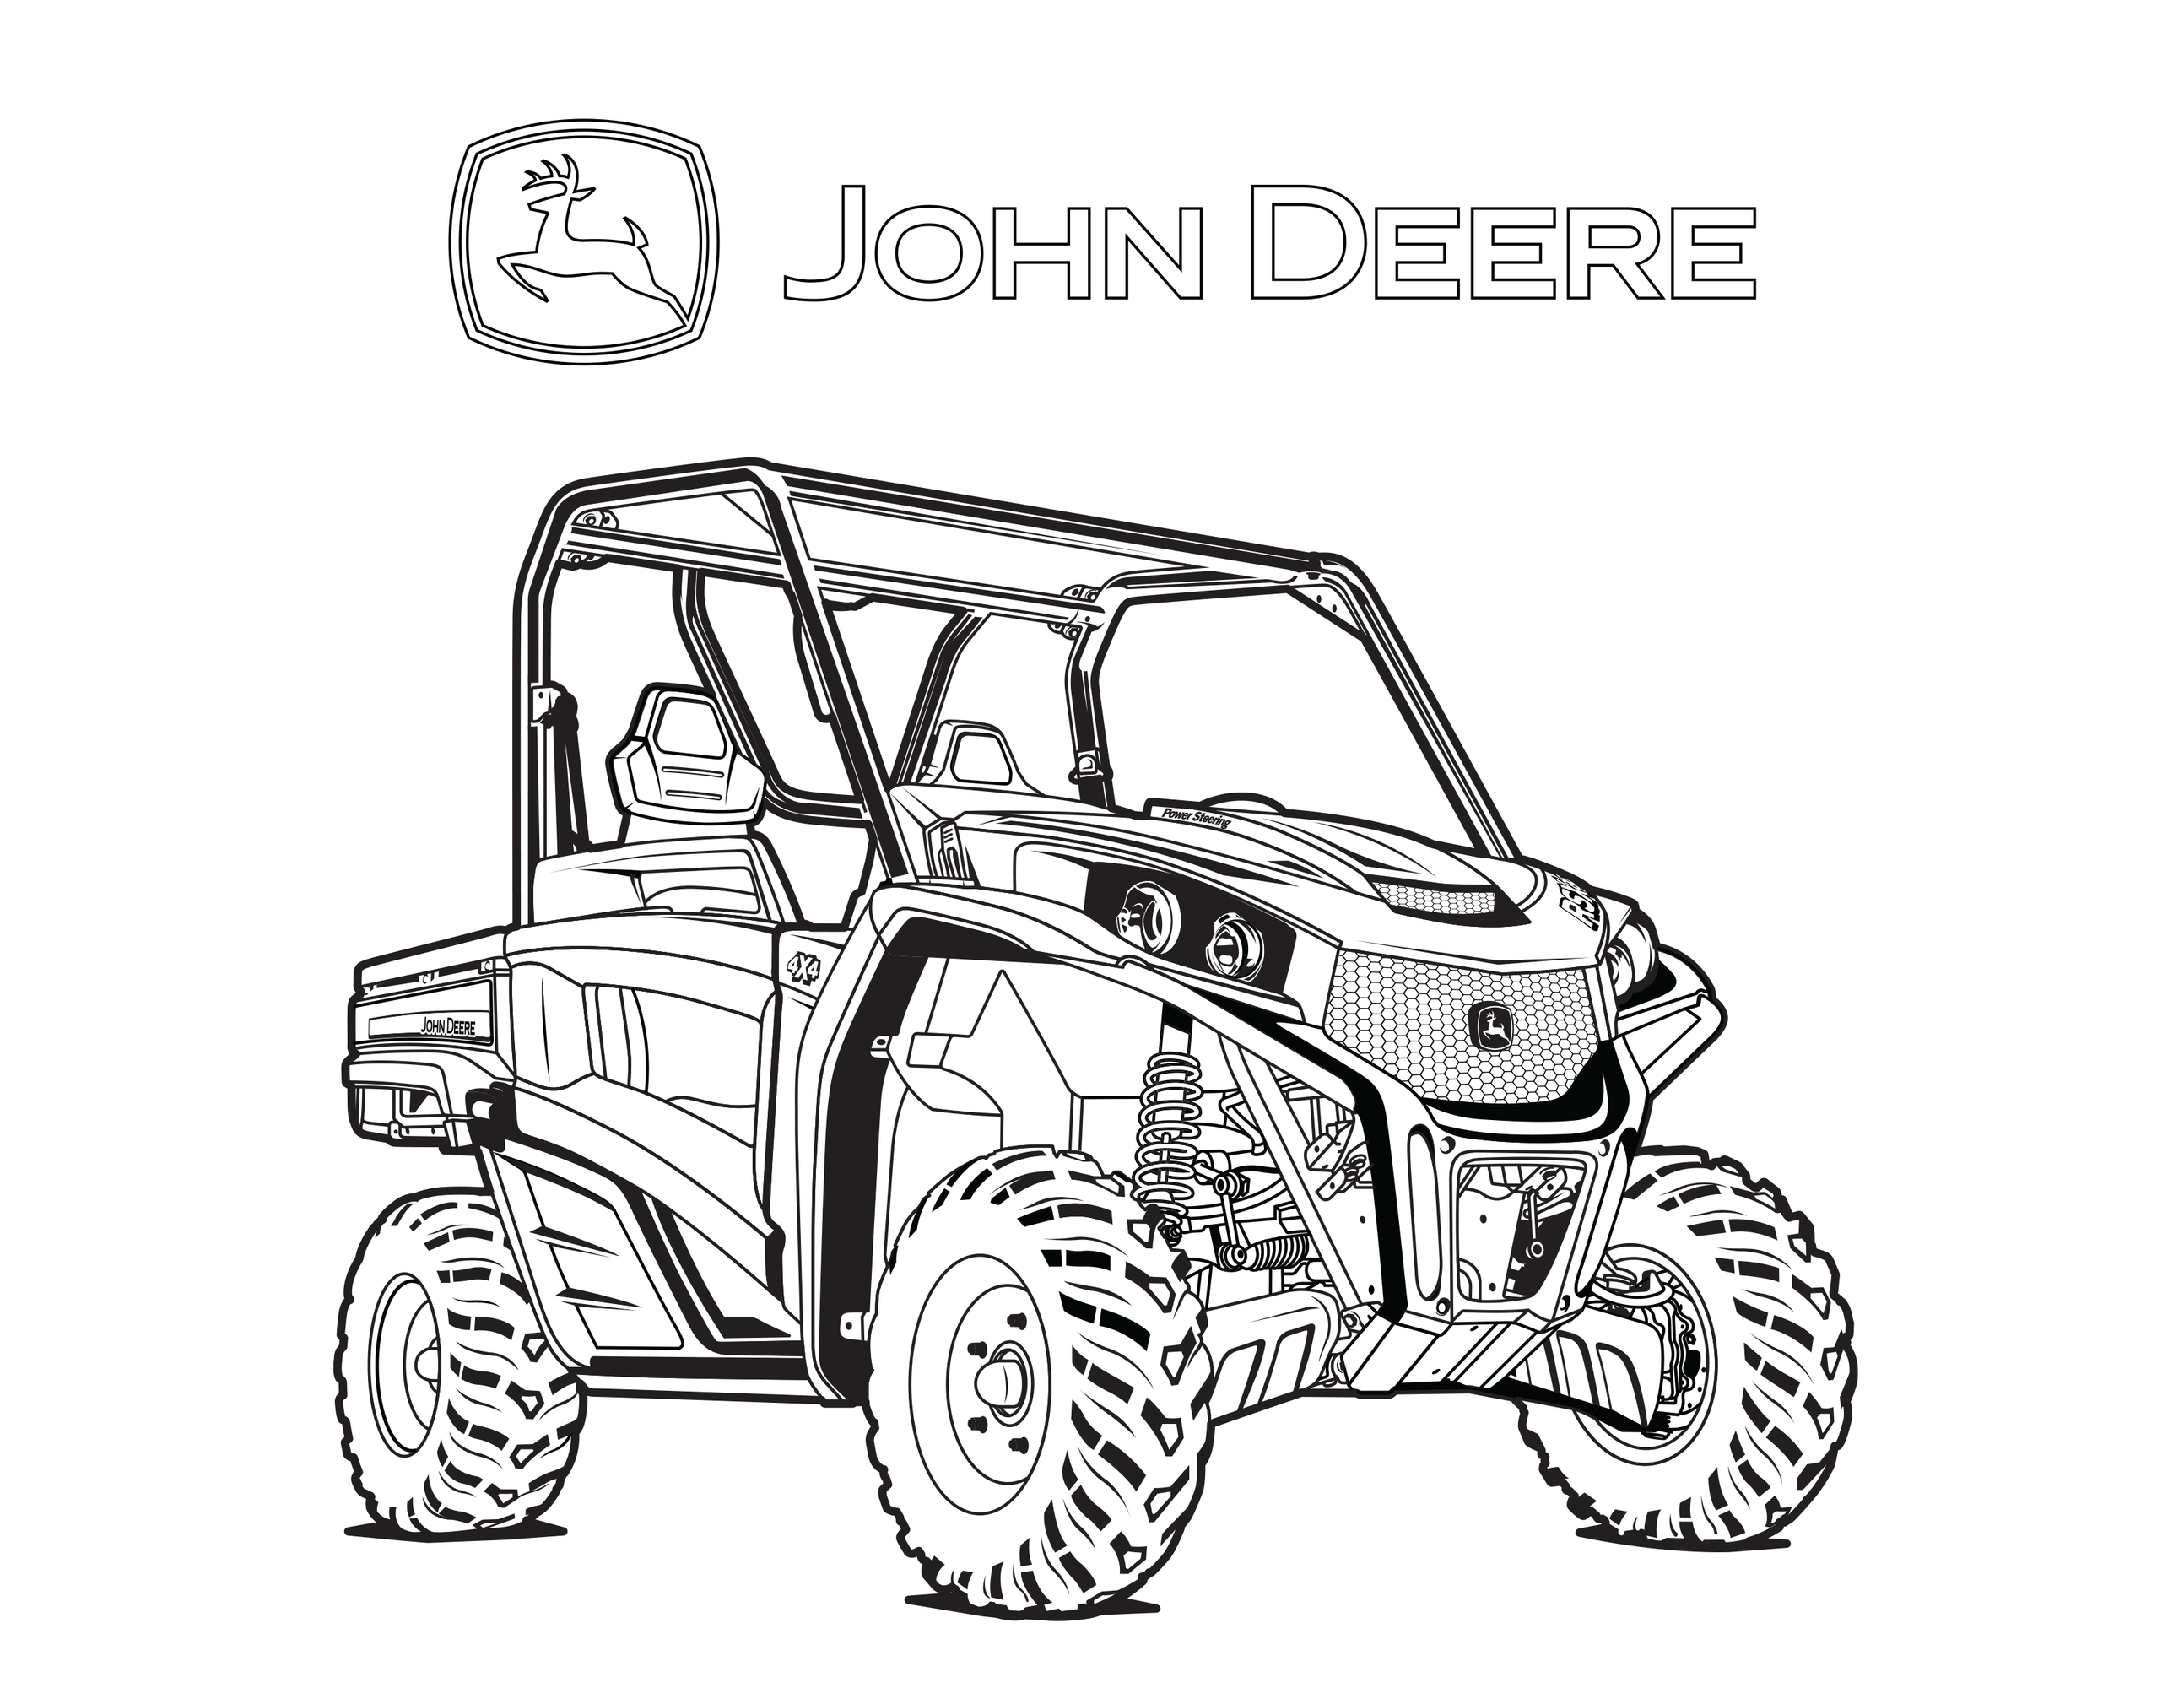 Simple Tractor coloring page  Free Printable Coloring Pages